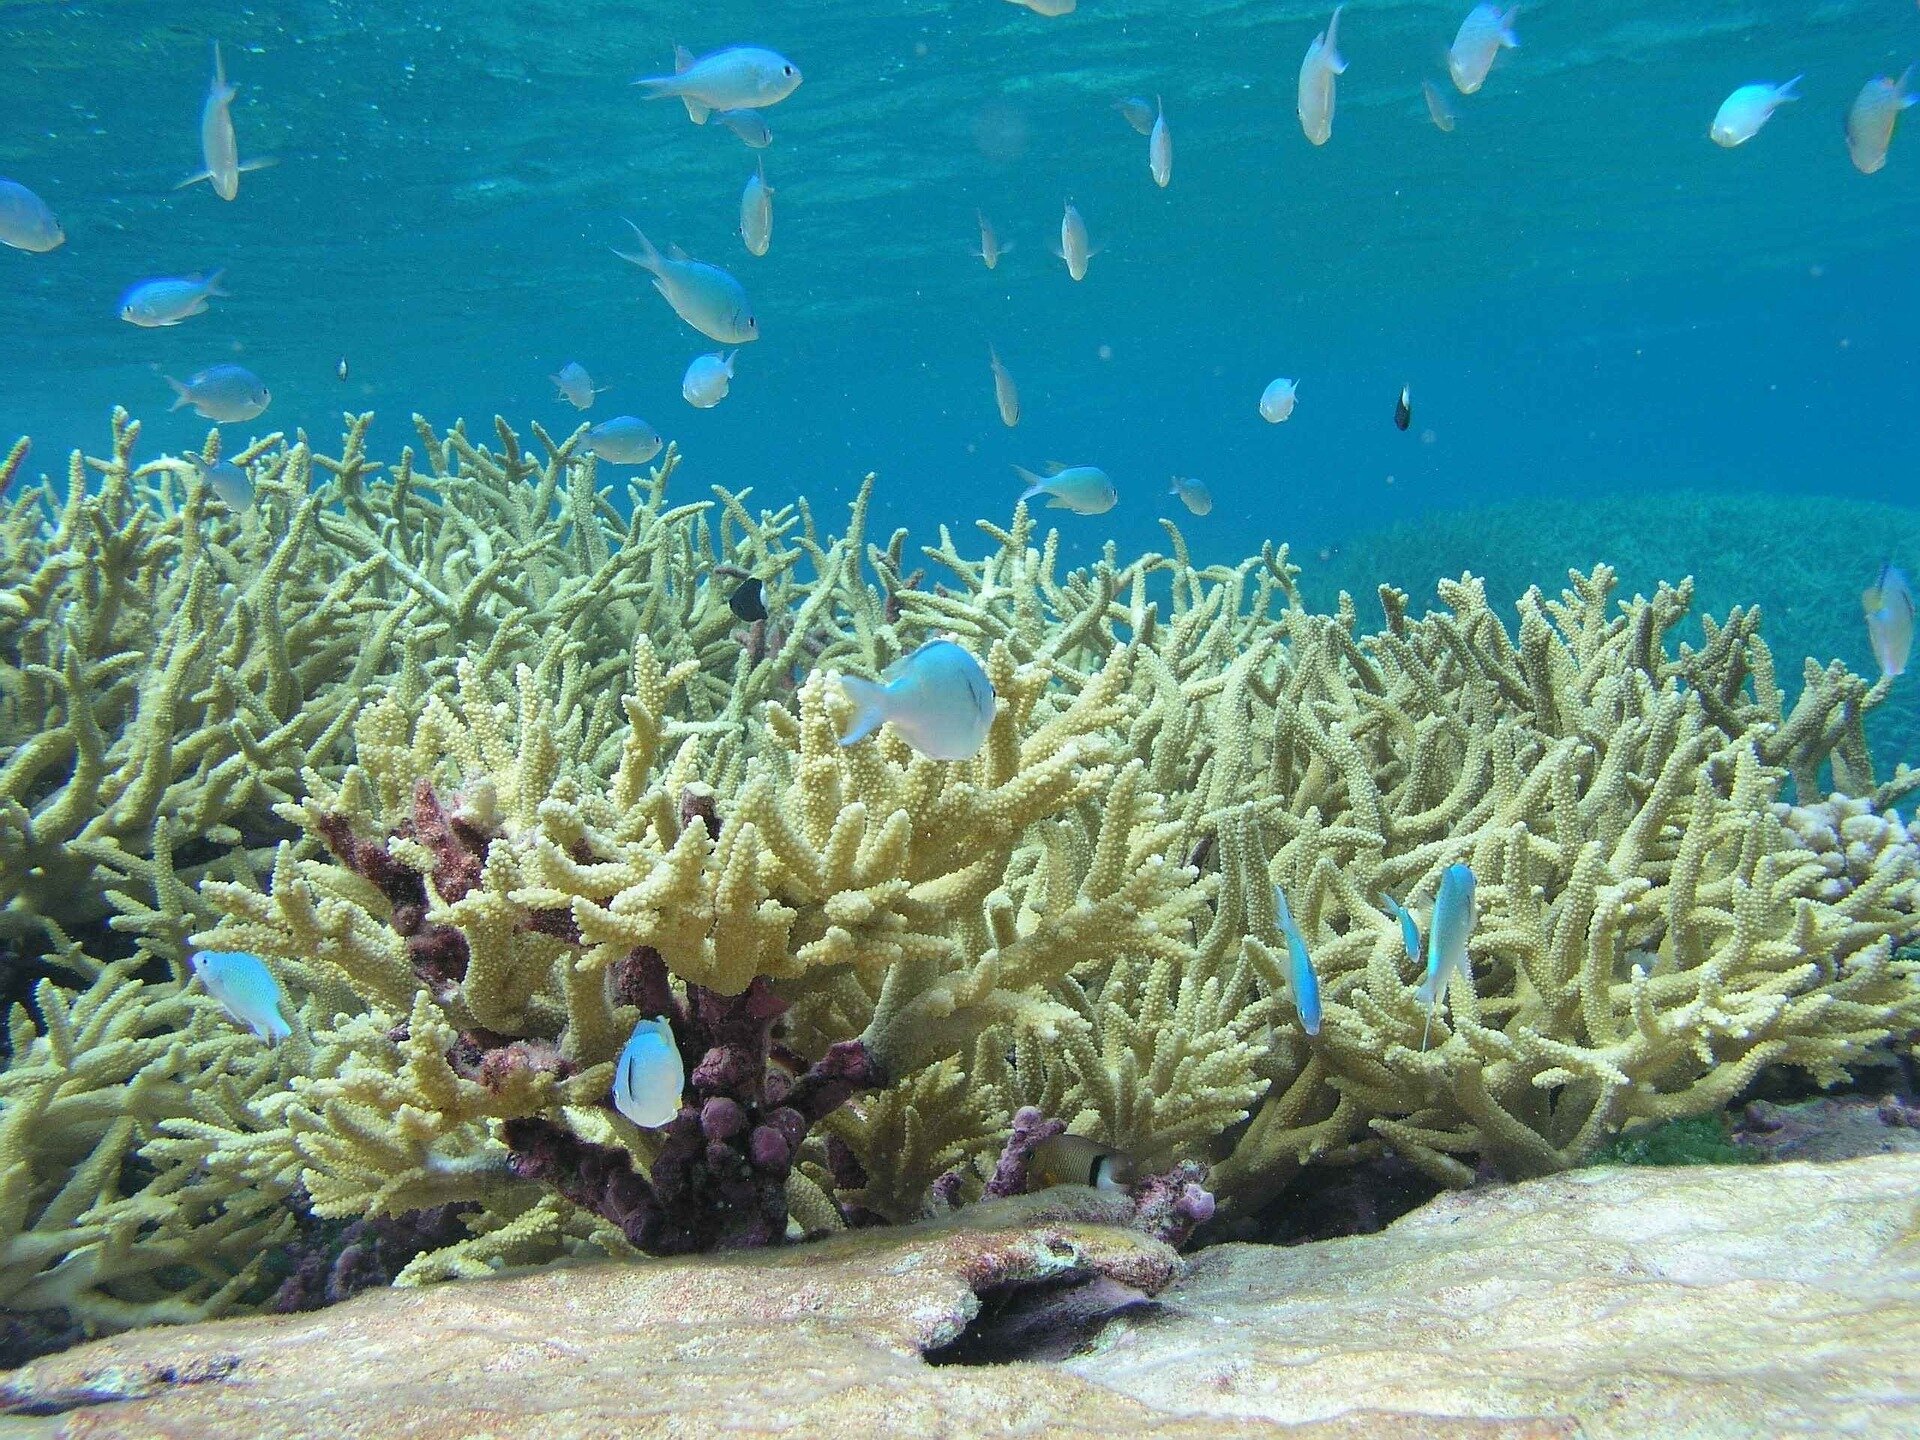 Coral Gardening Effectively Restores Staghorn Corals - Science